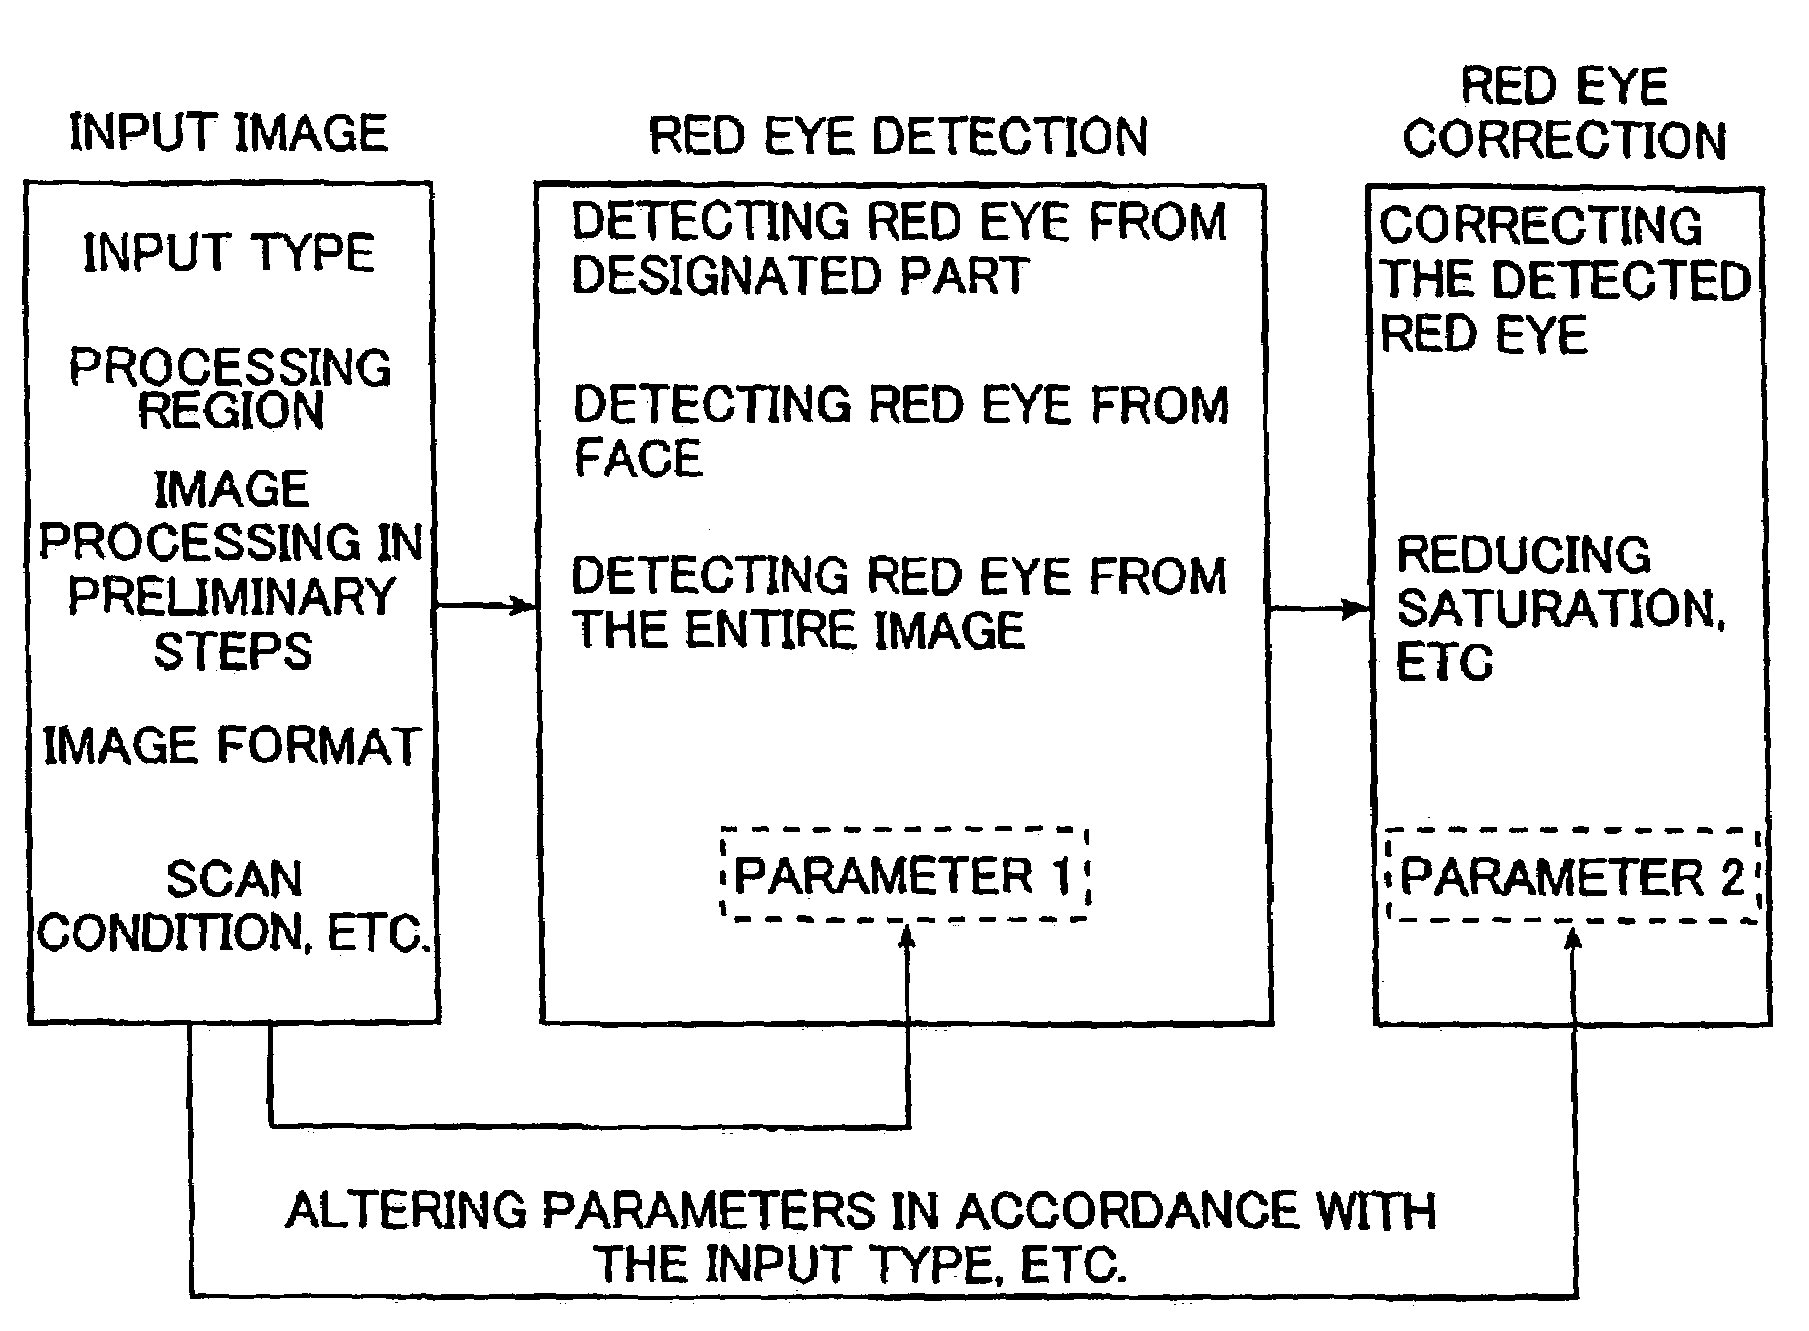 Method of detecting and correcting the red eye